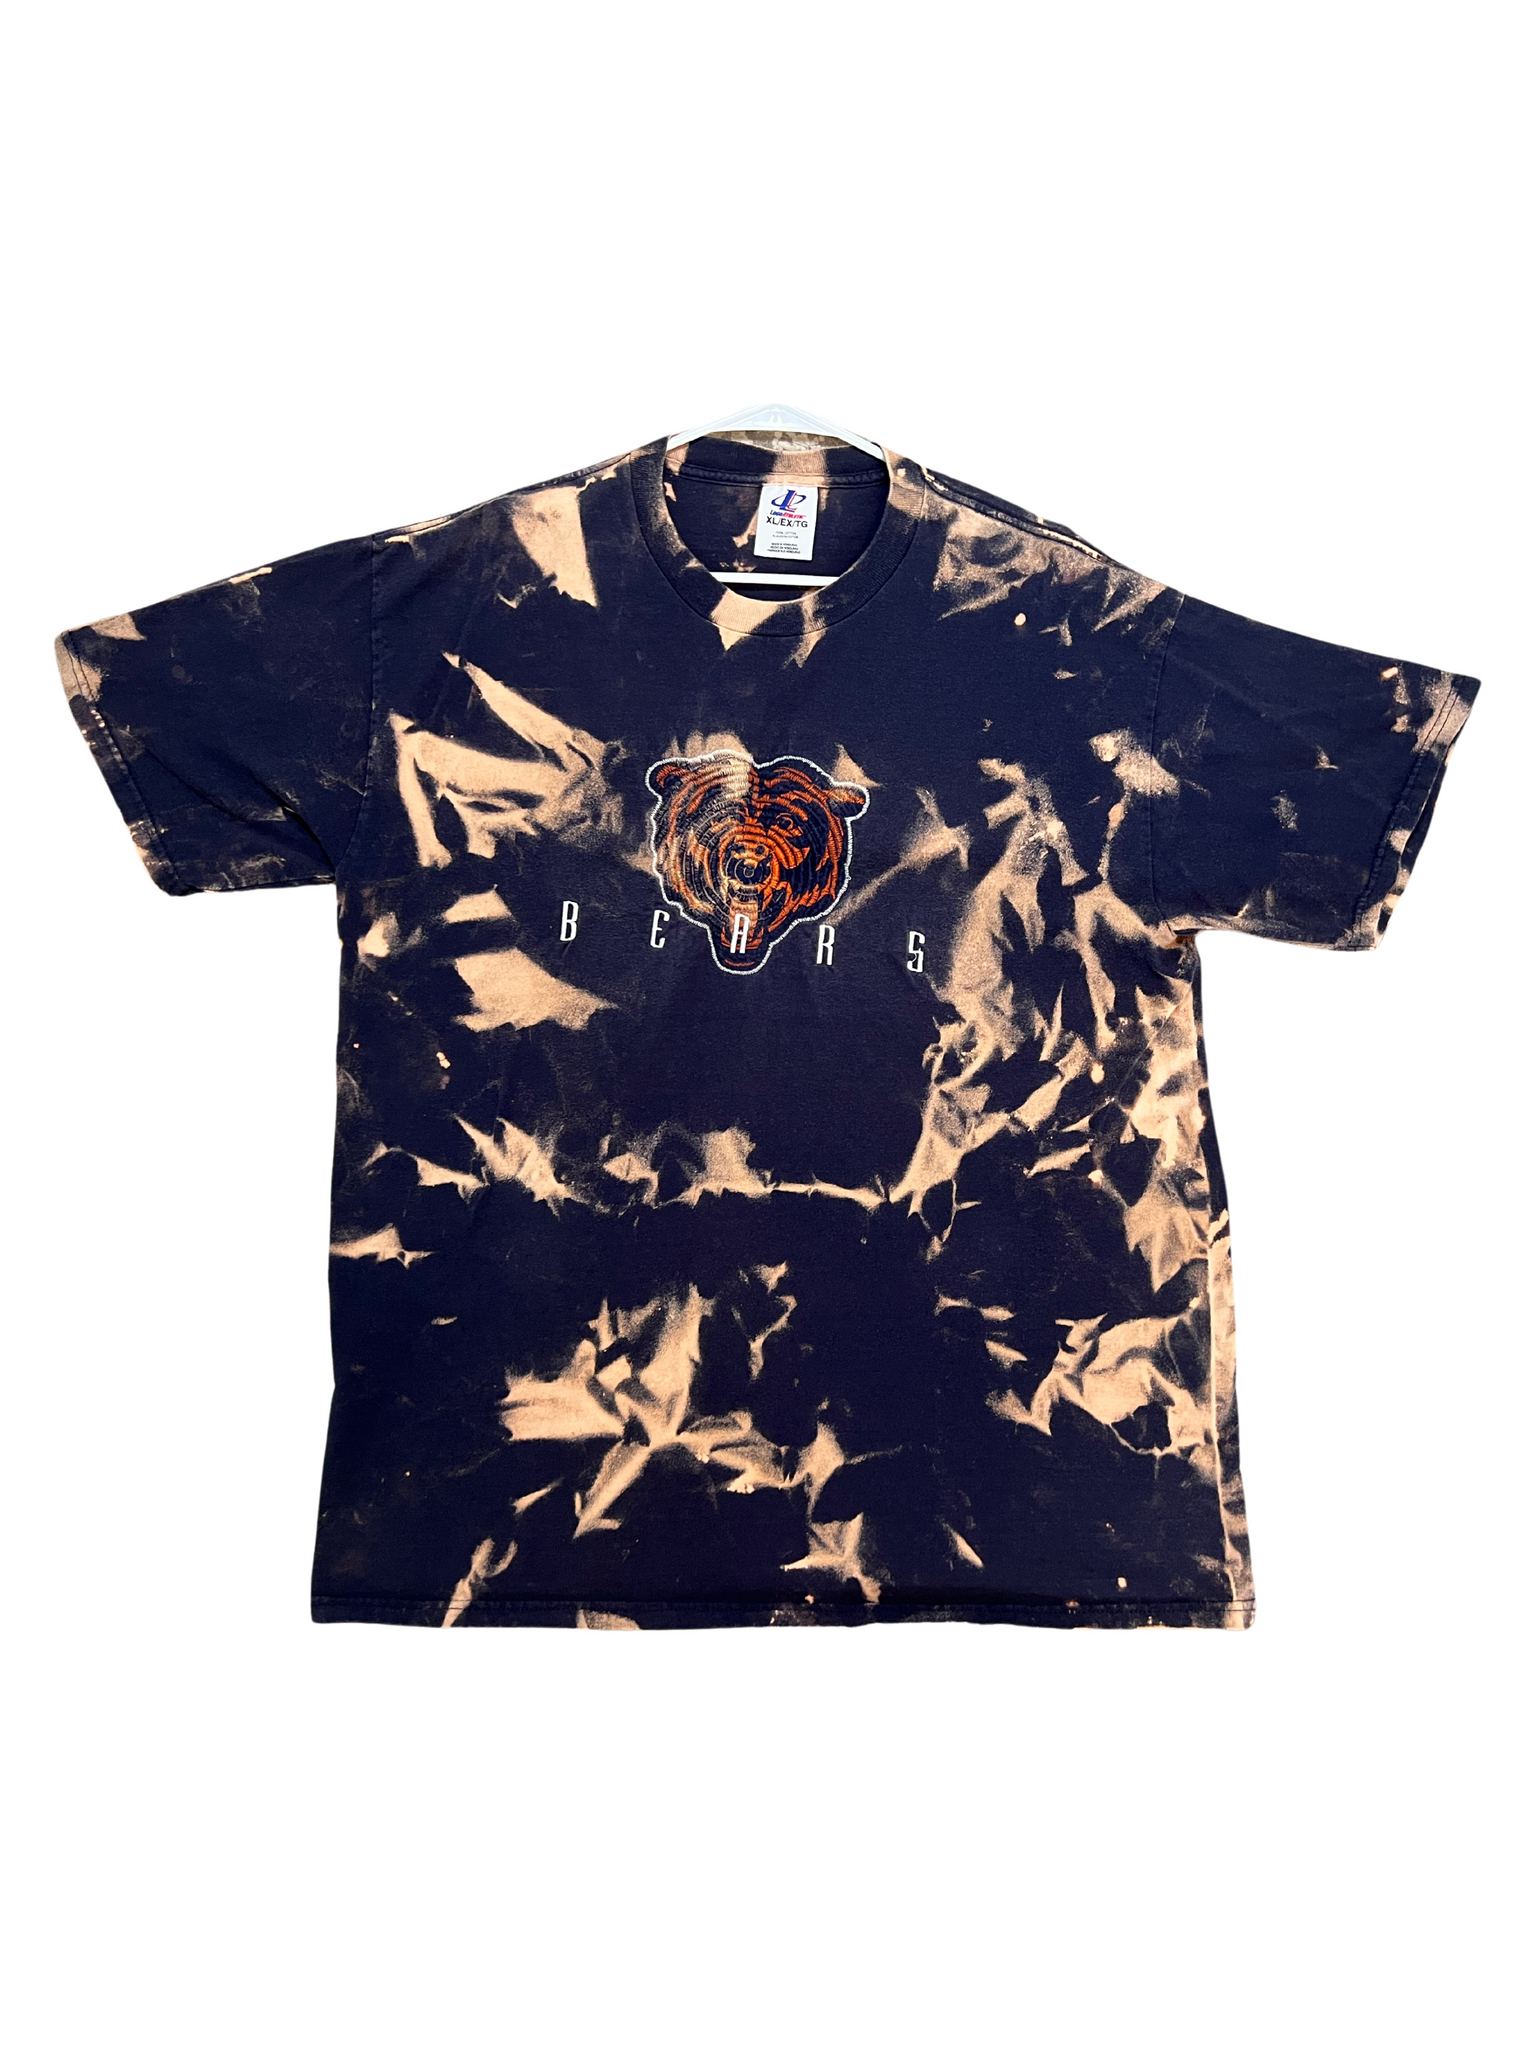 Vintage Chicago Bears Embroidered Bleached Shirt